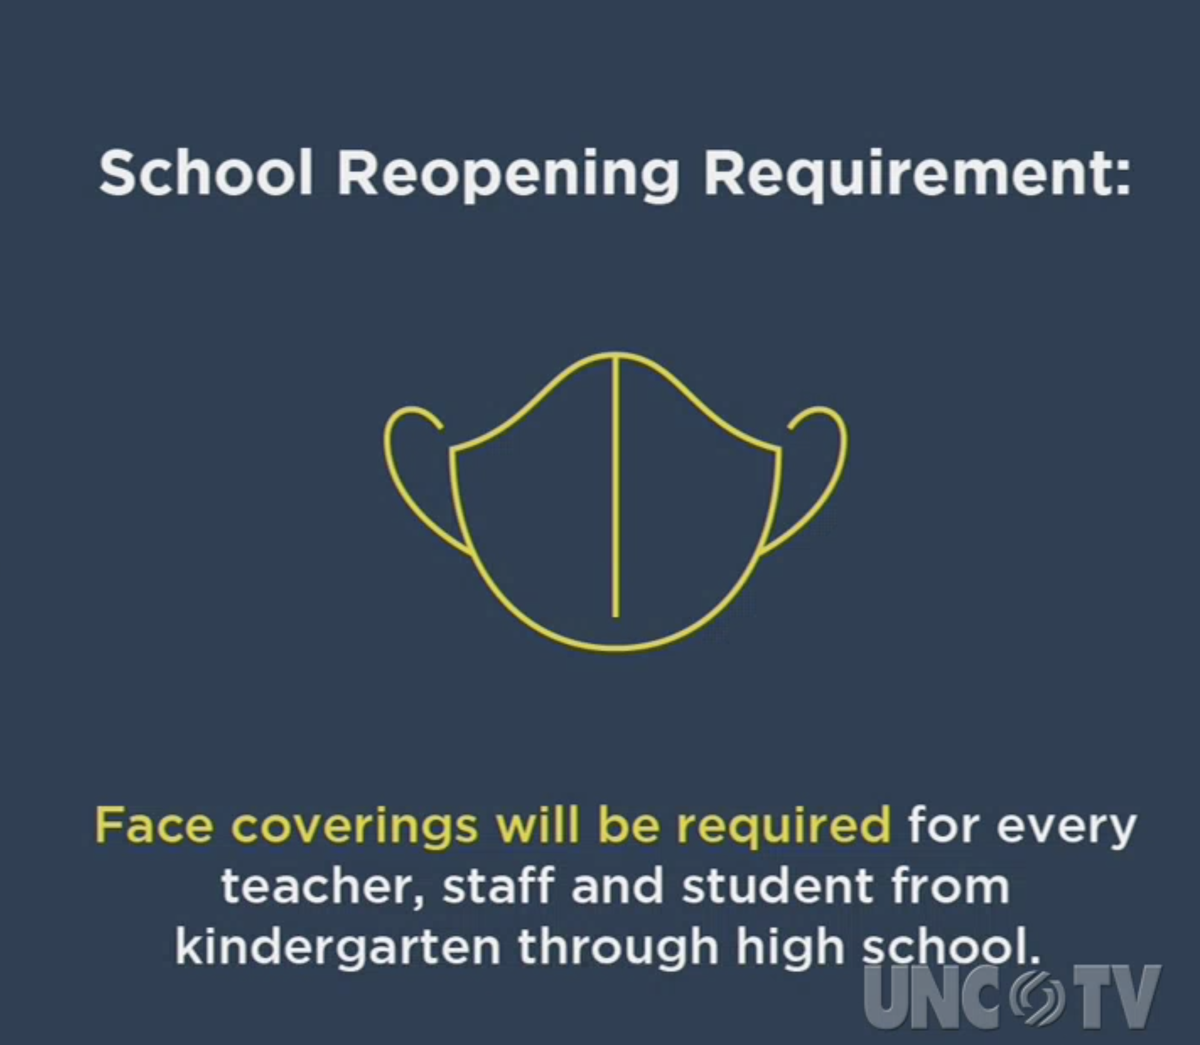 Here's what school reopening looks like: + Face Coverings (5 masks will be provided by state per person)